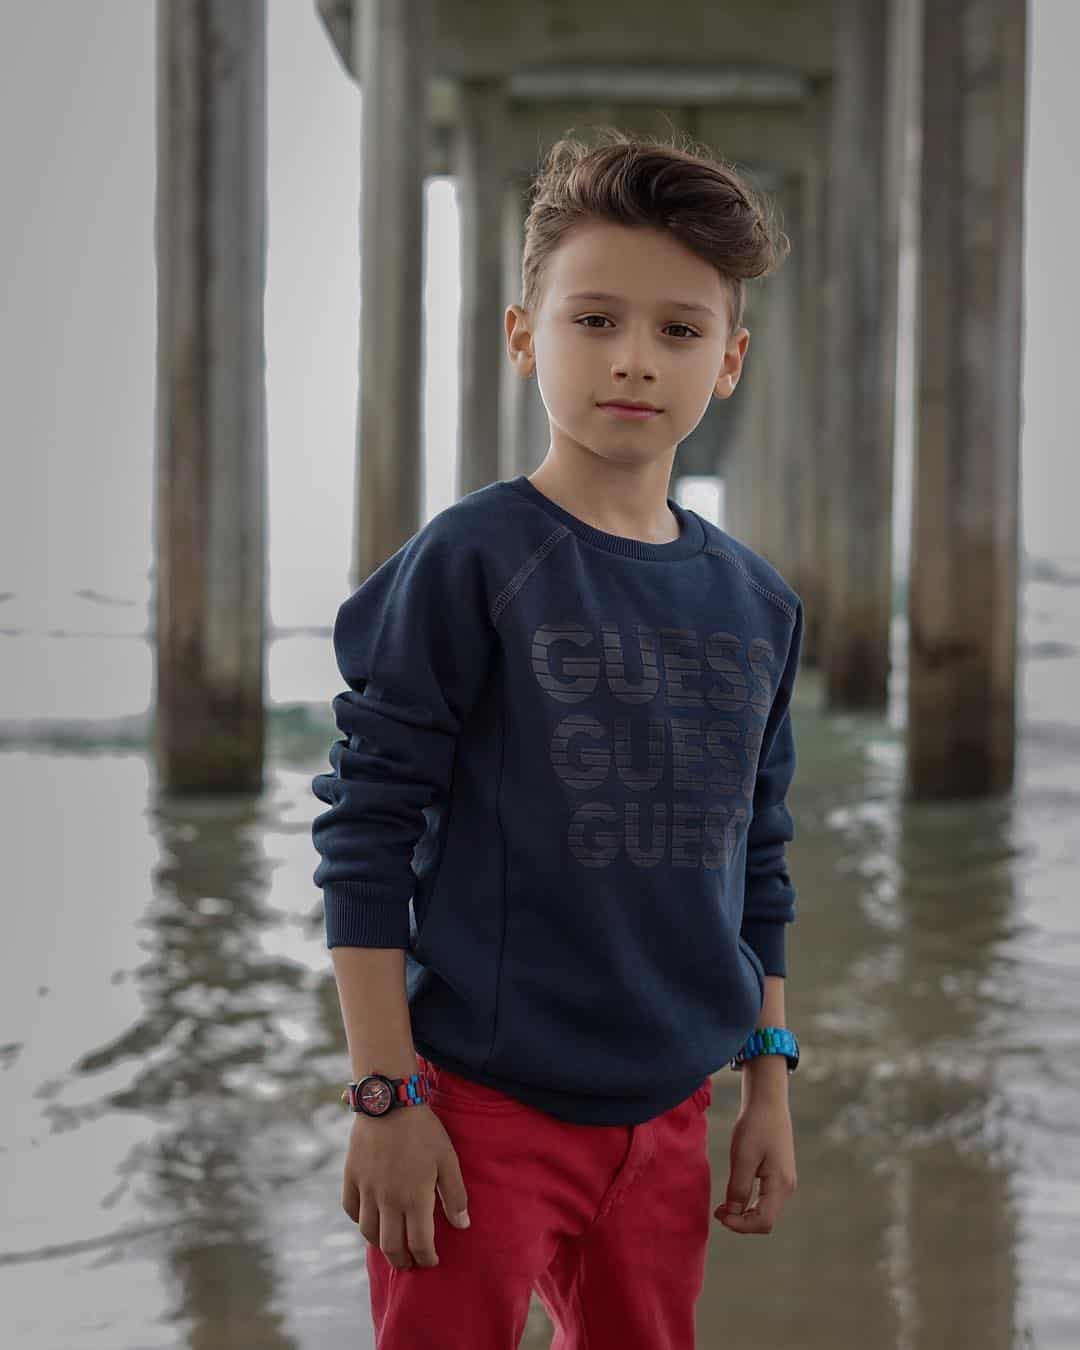 Kids Fashion 2020
 Top 8 Trends of Boys Fashion 2020 Best ideas for Kids